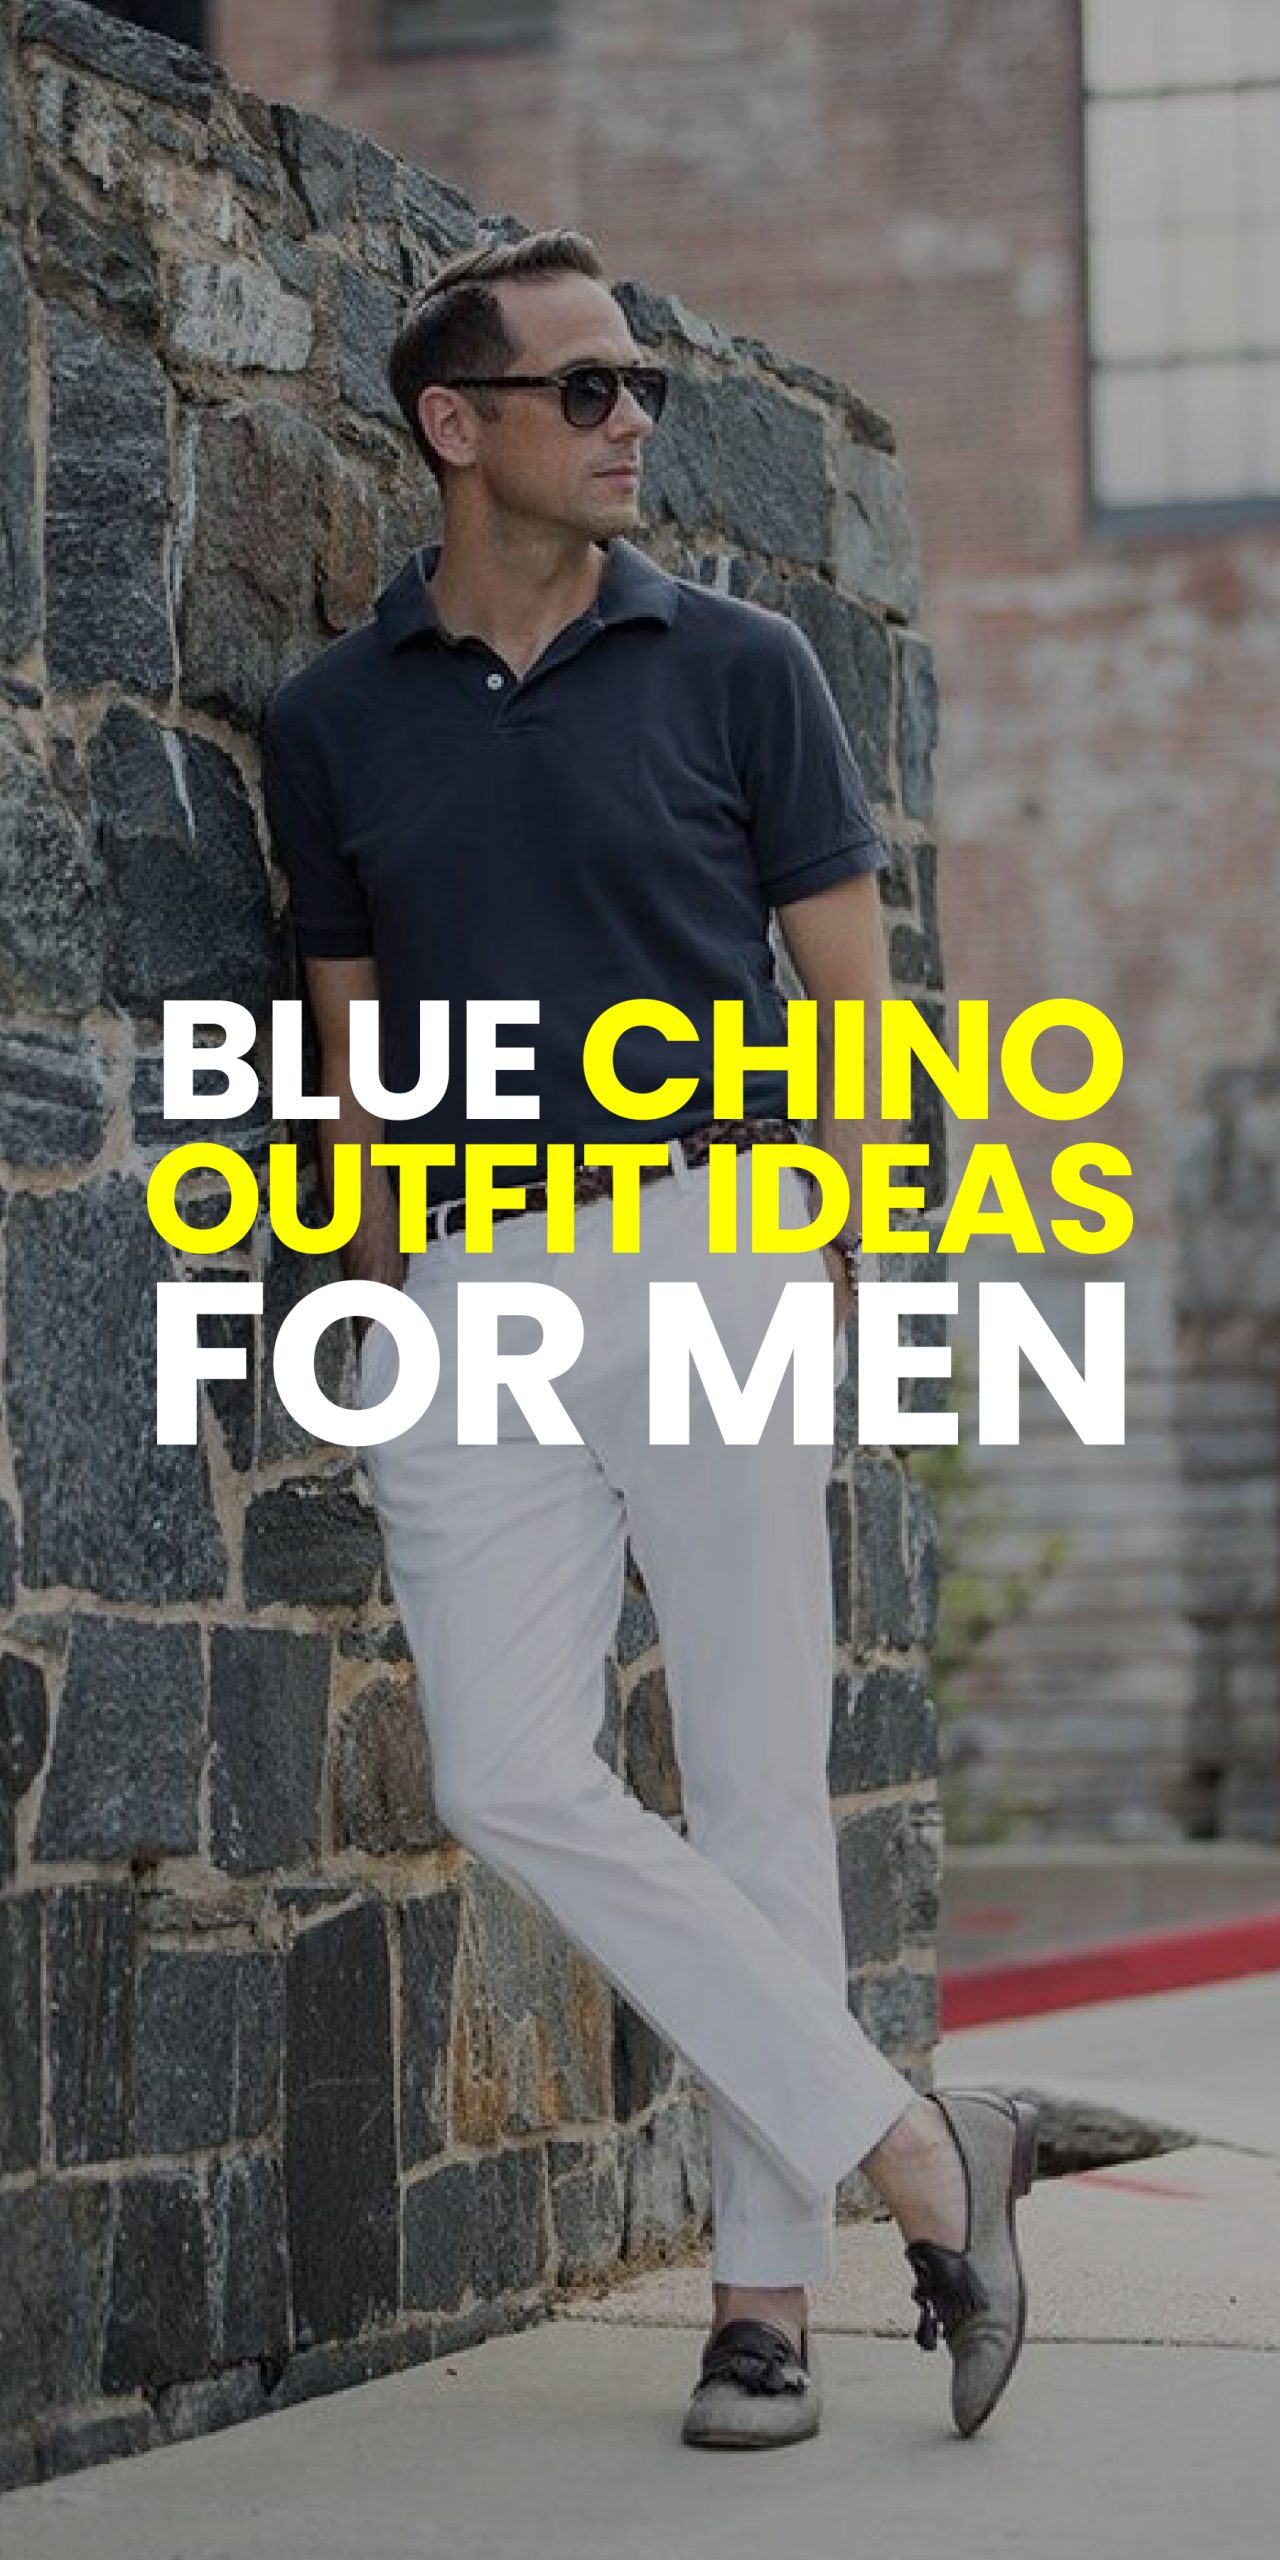 BLUE CHINO OUTFIT IDEAS FOR MEN